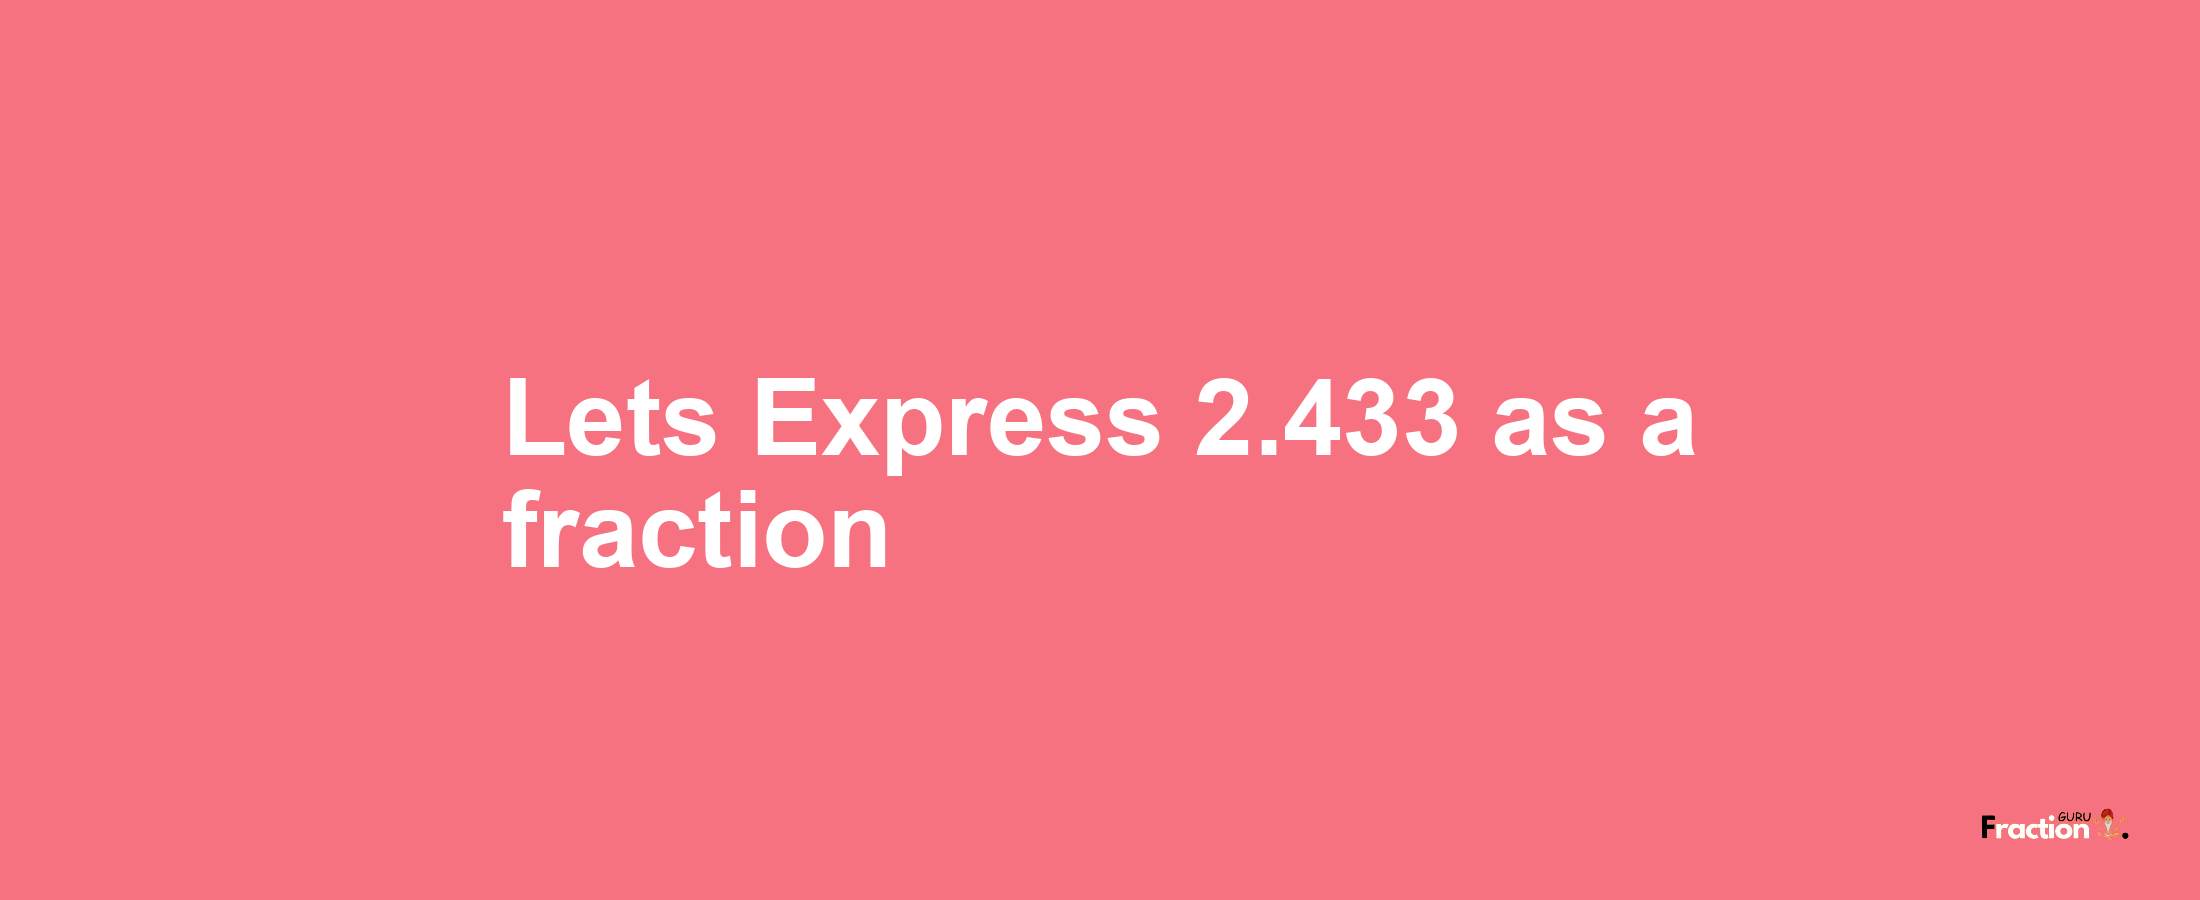 Lets Express 2.433 as afraction